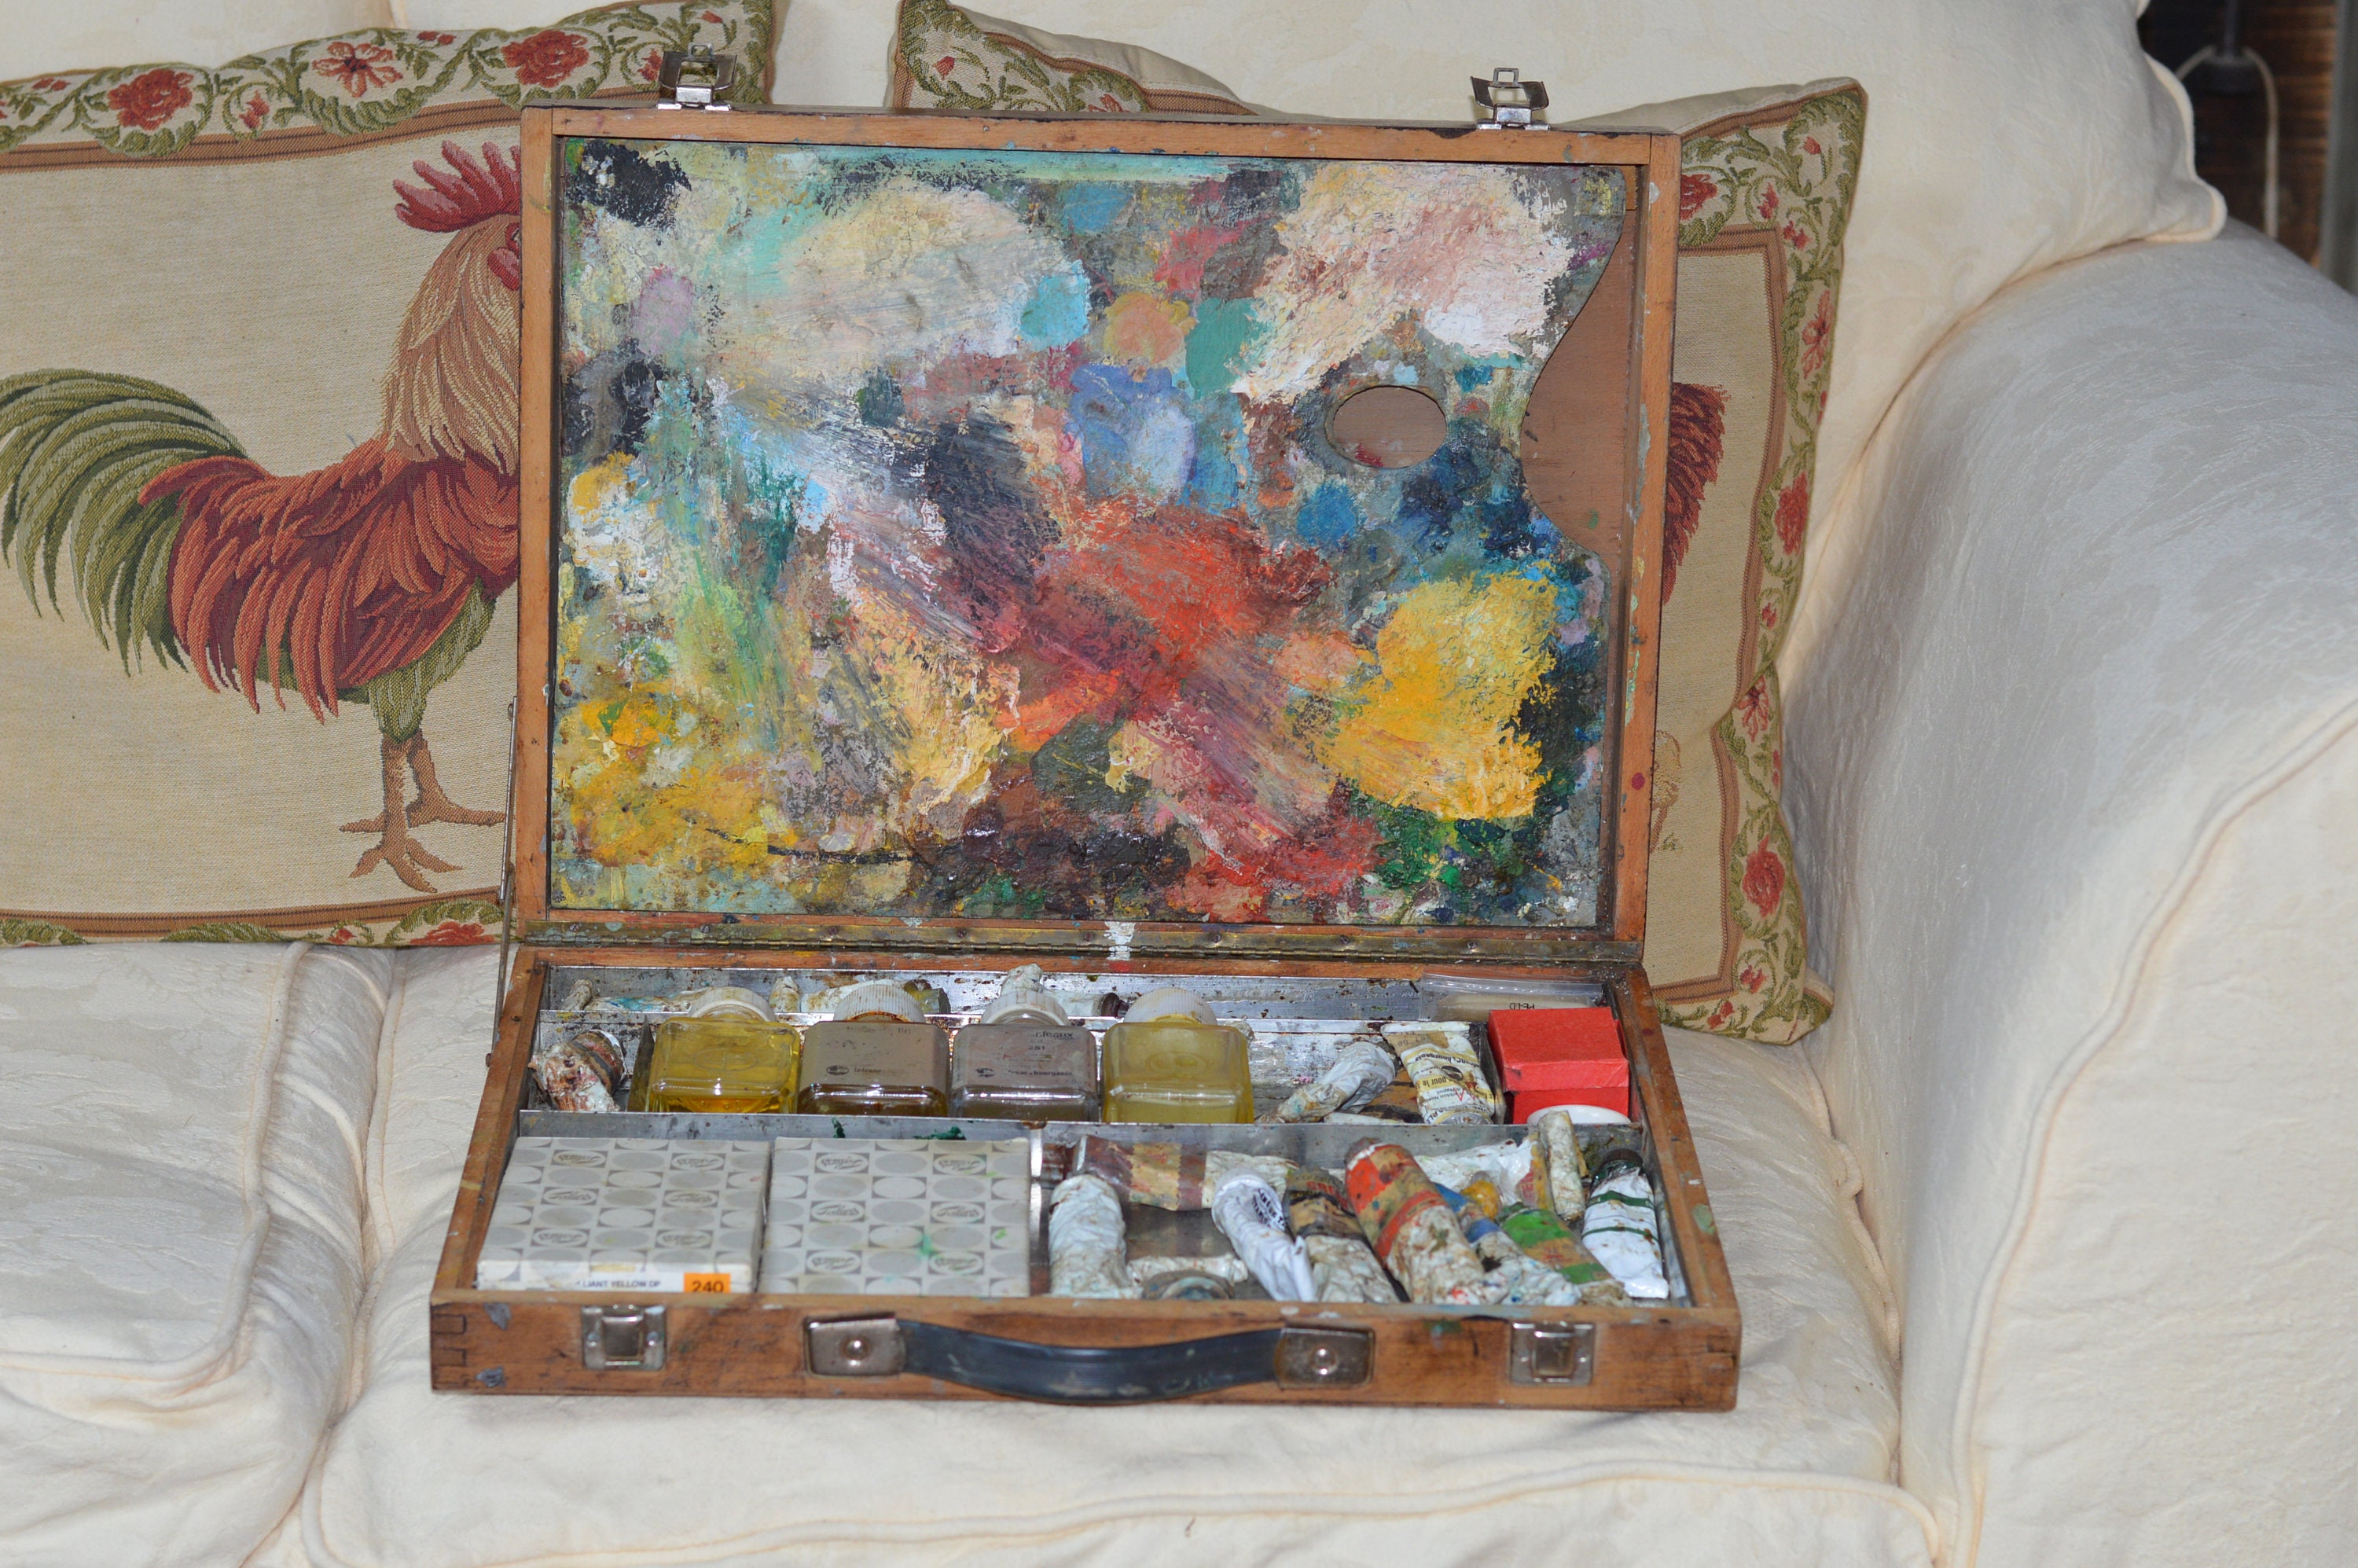 Art Case and Paint Easel, Wooden Art Case With Seasoned Picture